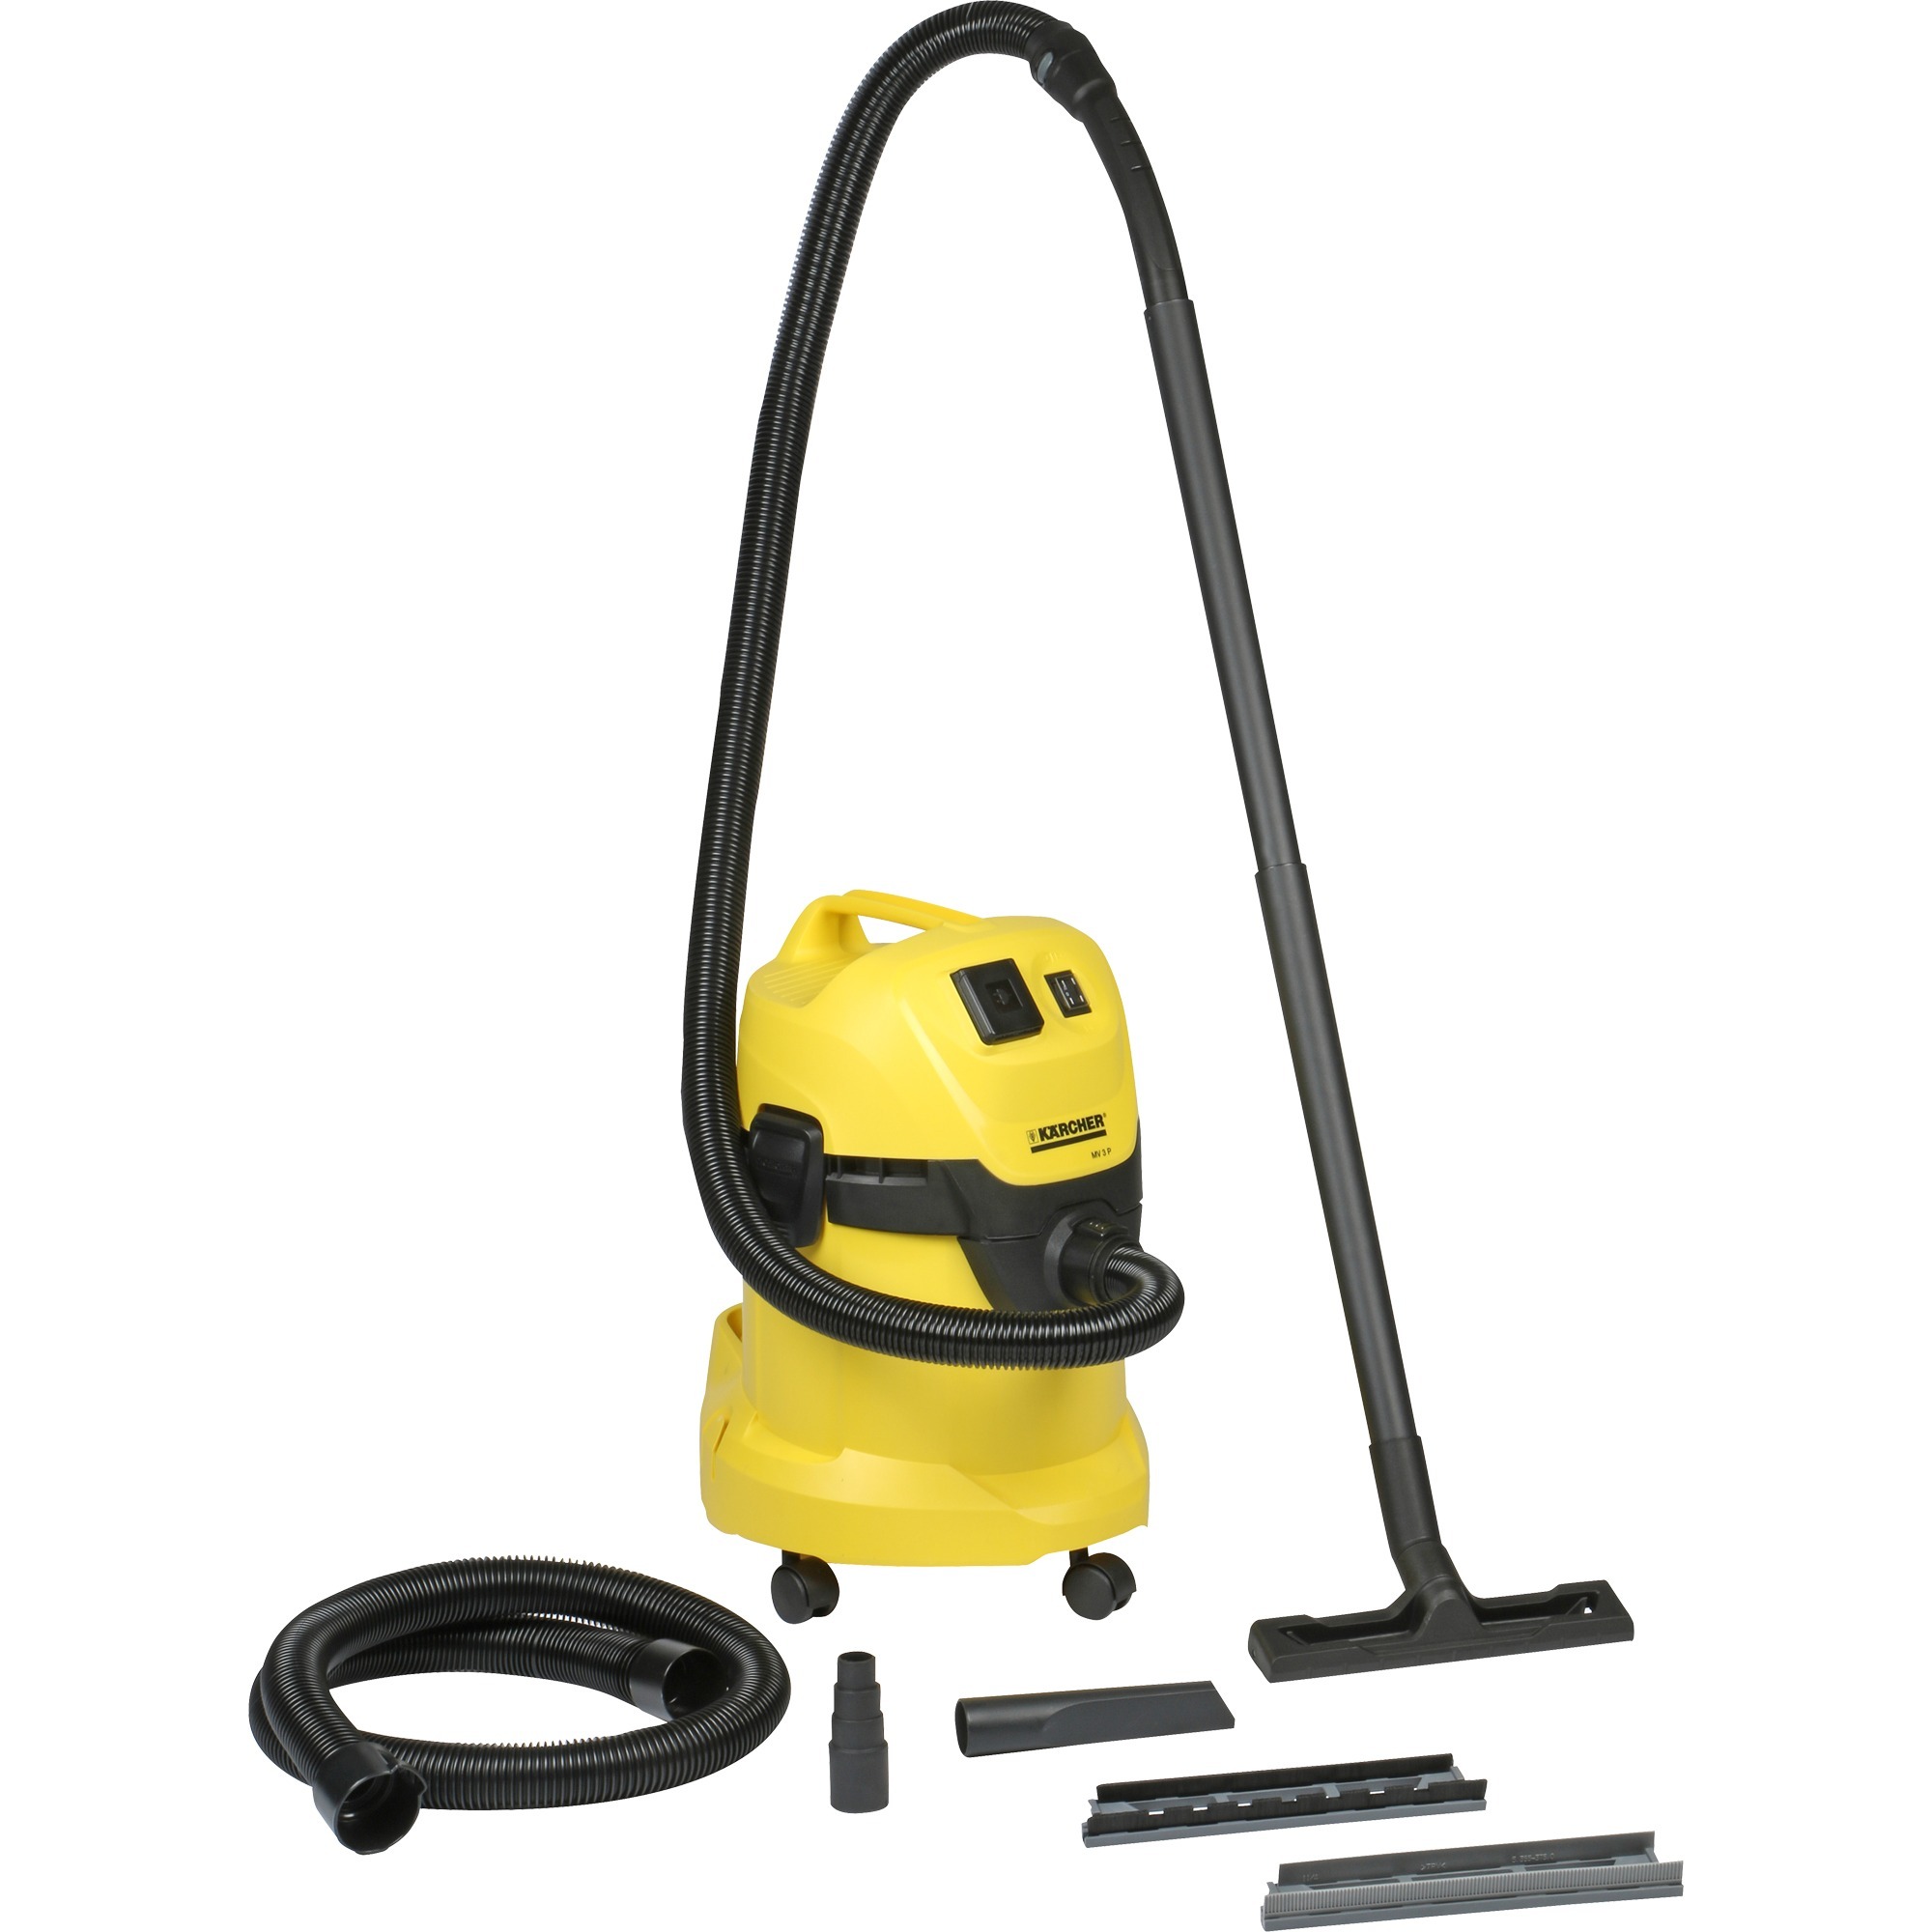 WD 3 P 1400 W B?ben pró?niowy 17 L Czarny, ?ó?ty, Wet/dry vacuum cleaner